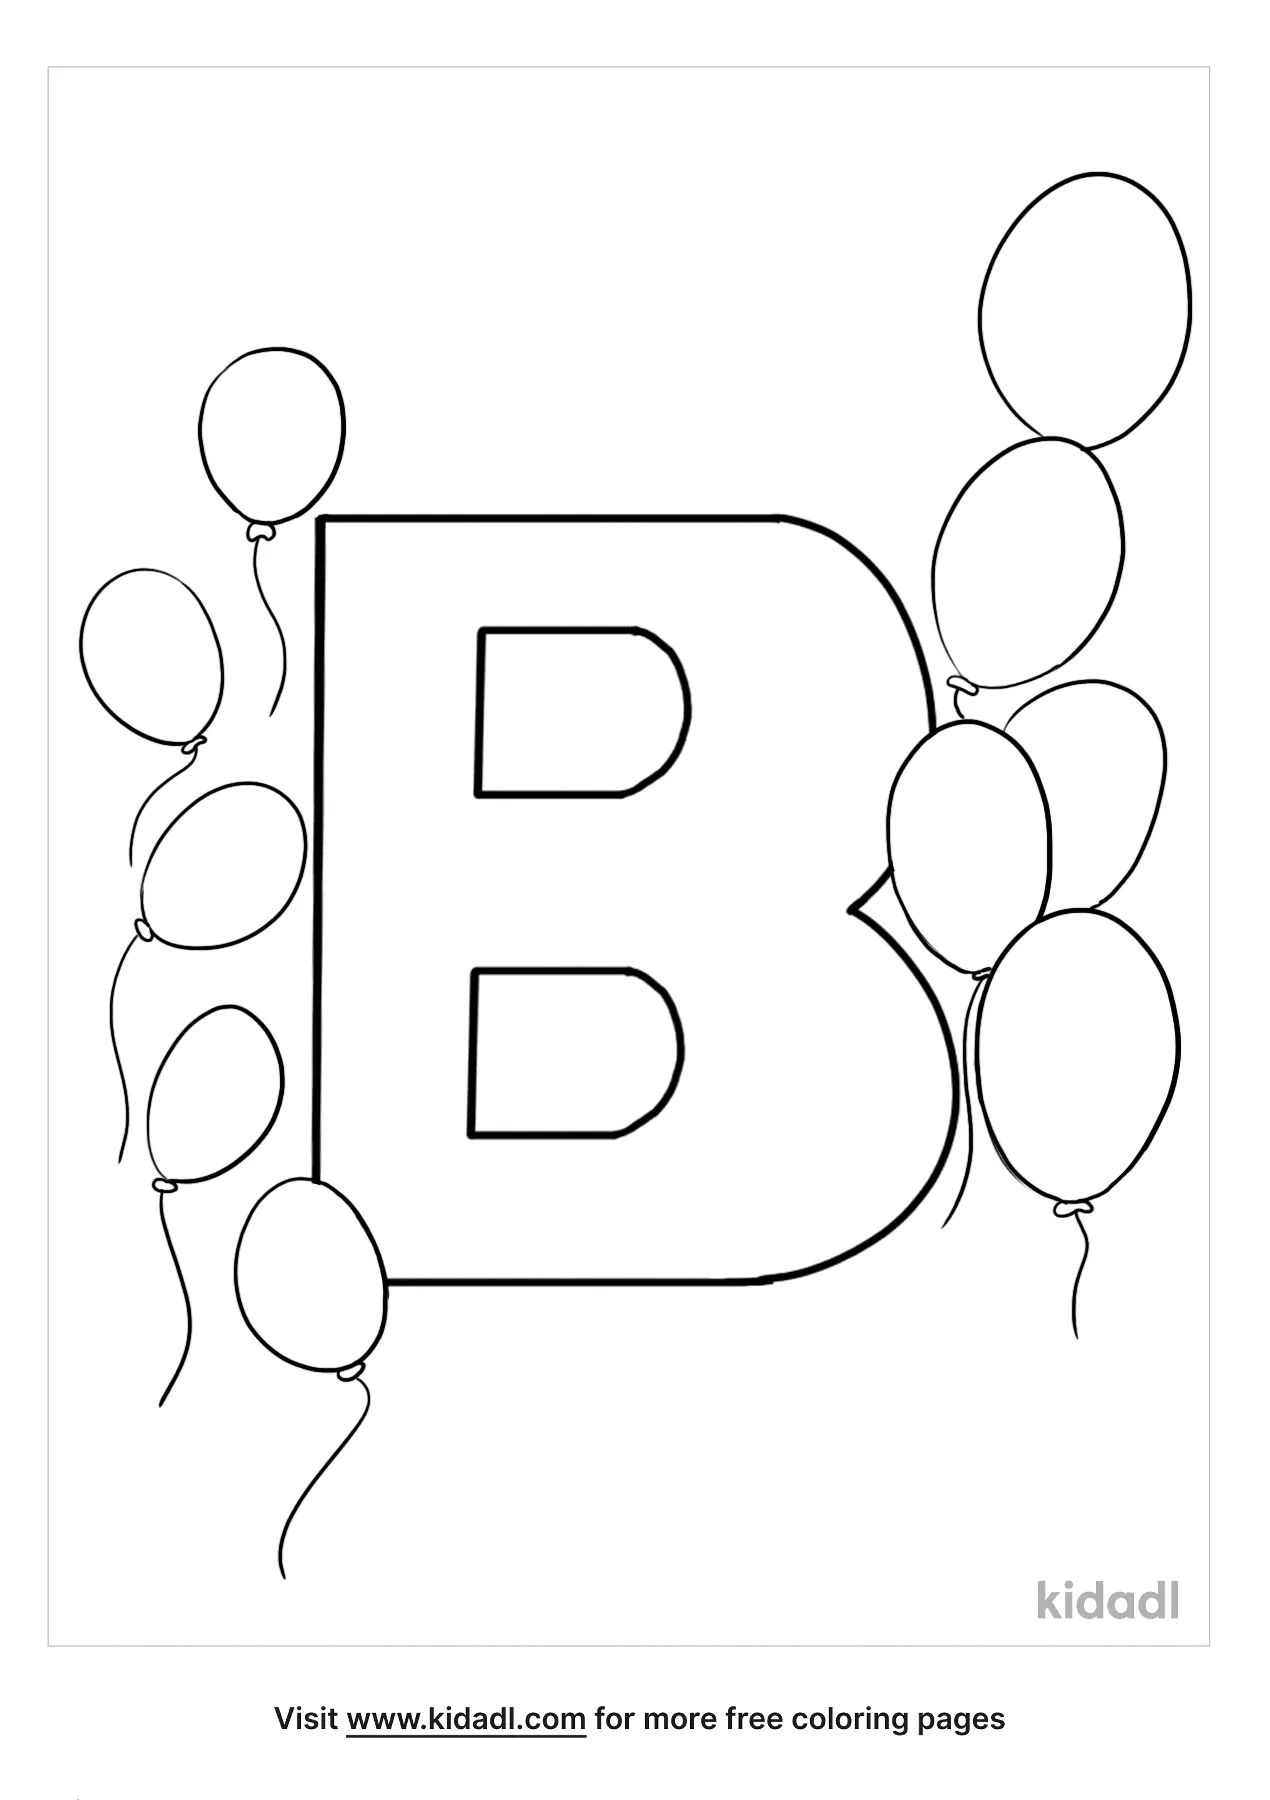 Letter B Coloring Pages Activities